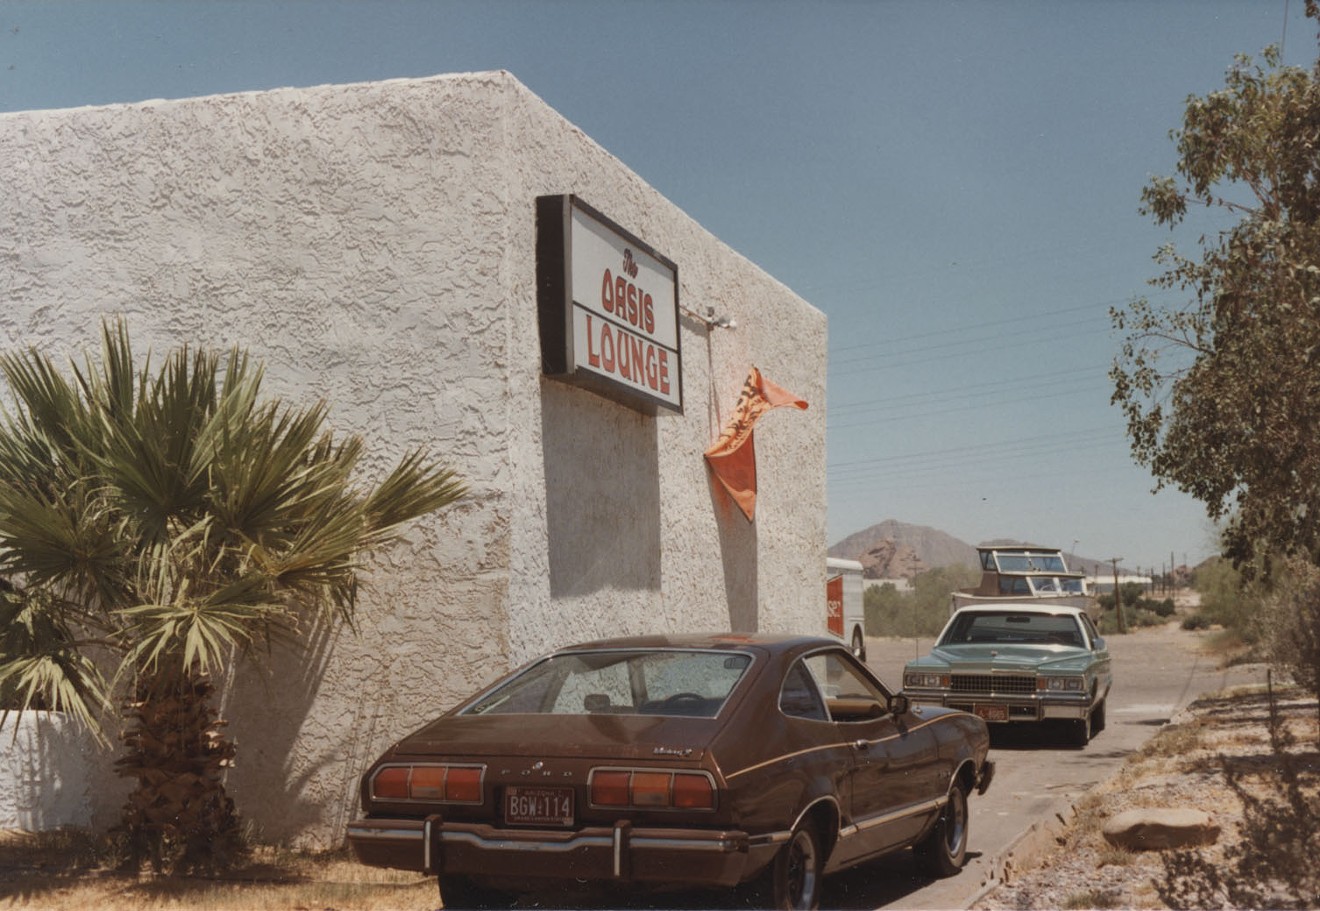 The Oasis Lounge at 26 South Farmer Avenue, and 10 other examples of great Tempe bar and restaurant lore.